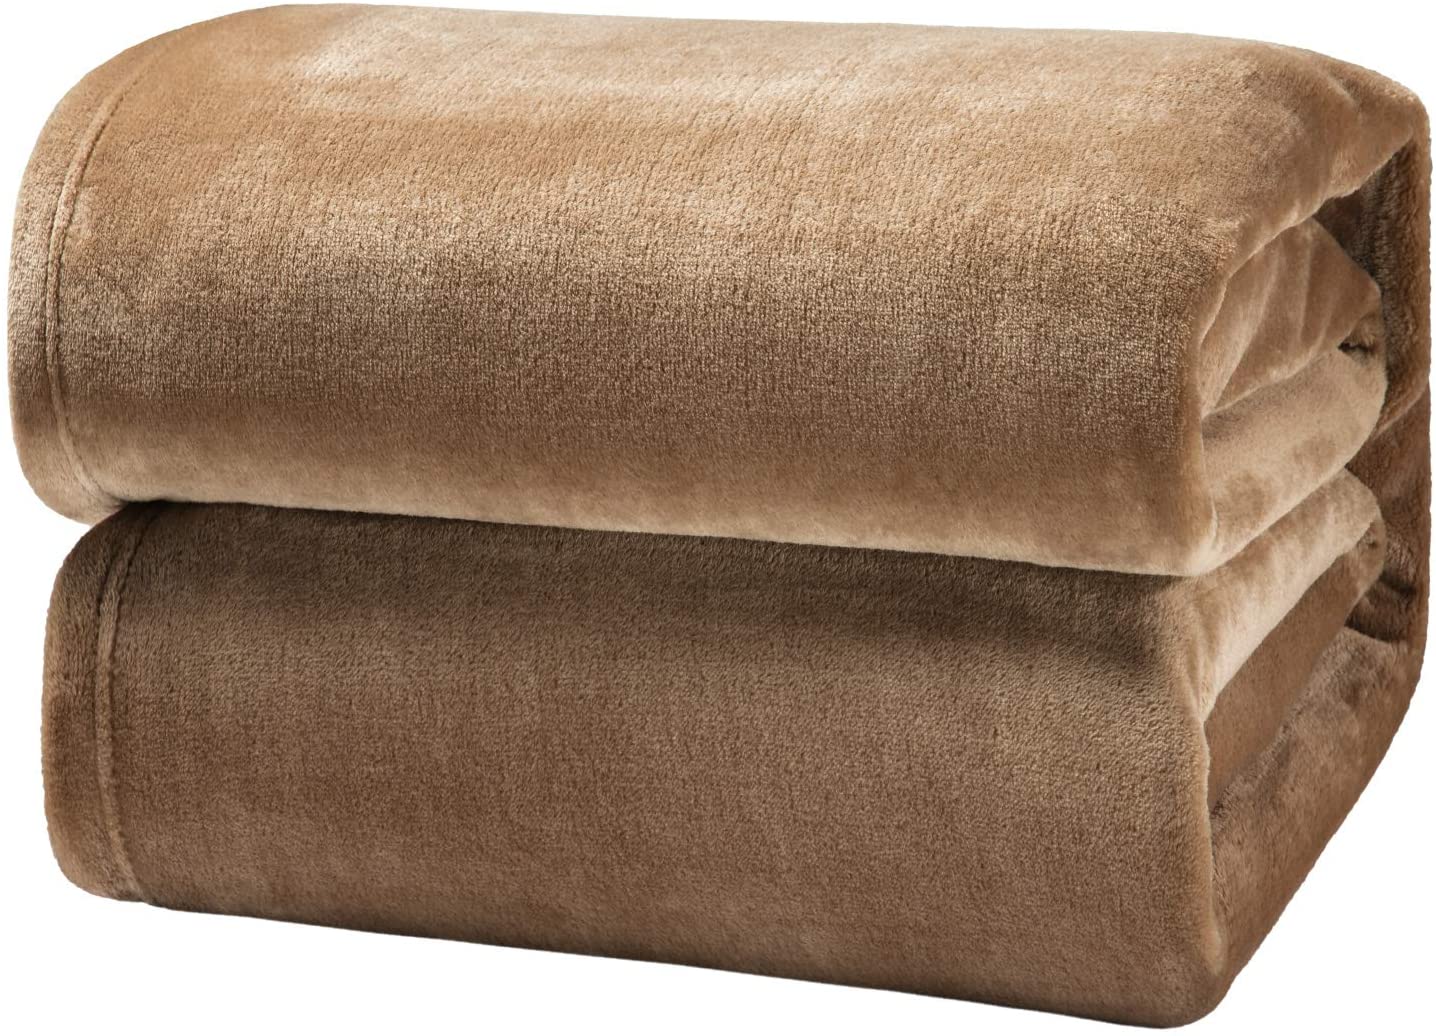 loomsmith-solid-double-AC-blanket-in-light-brown-flannel-fabric-soft-in-touch-gift-item-as-token-of-love-comfy